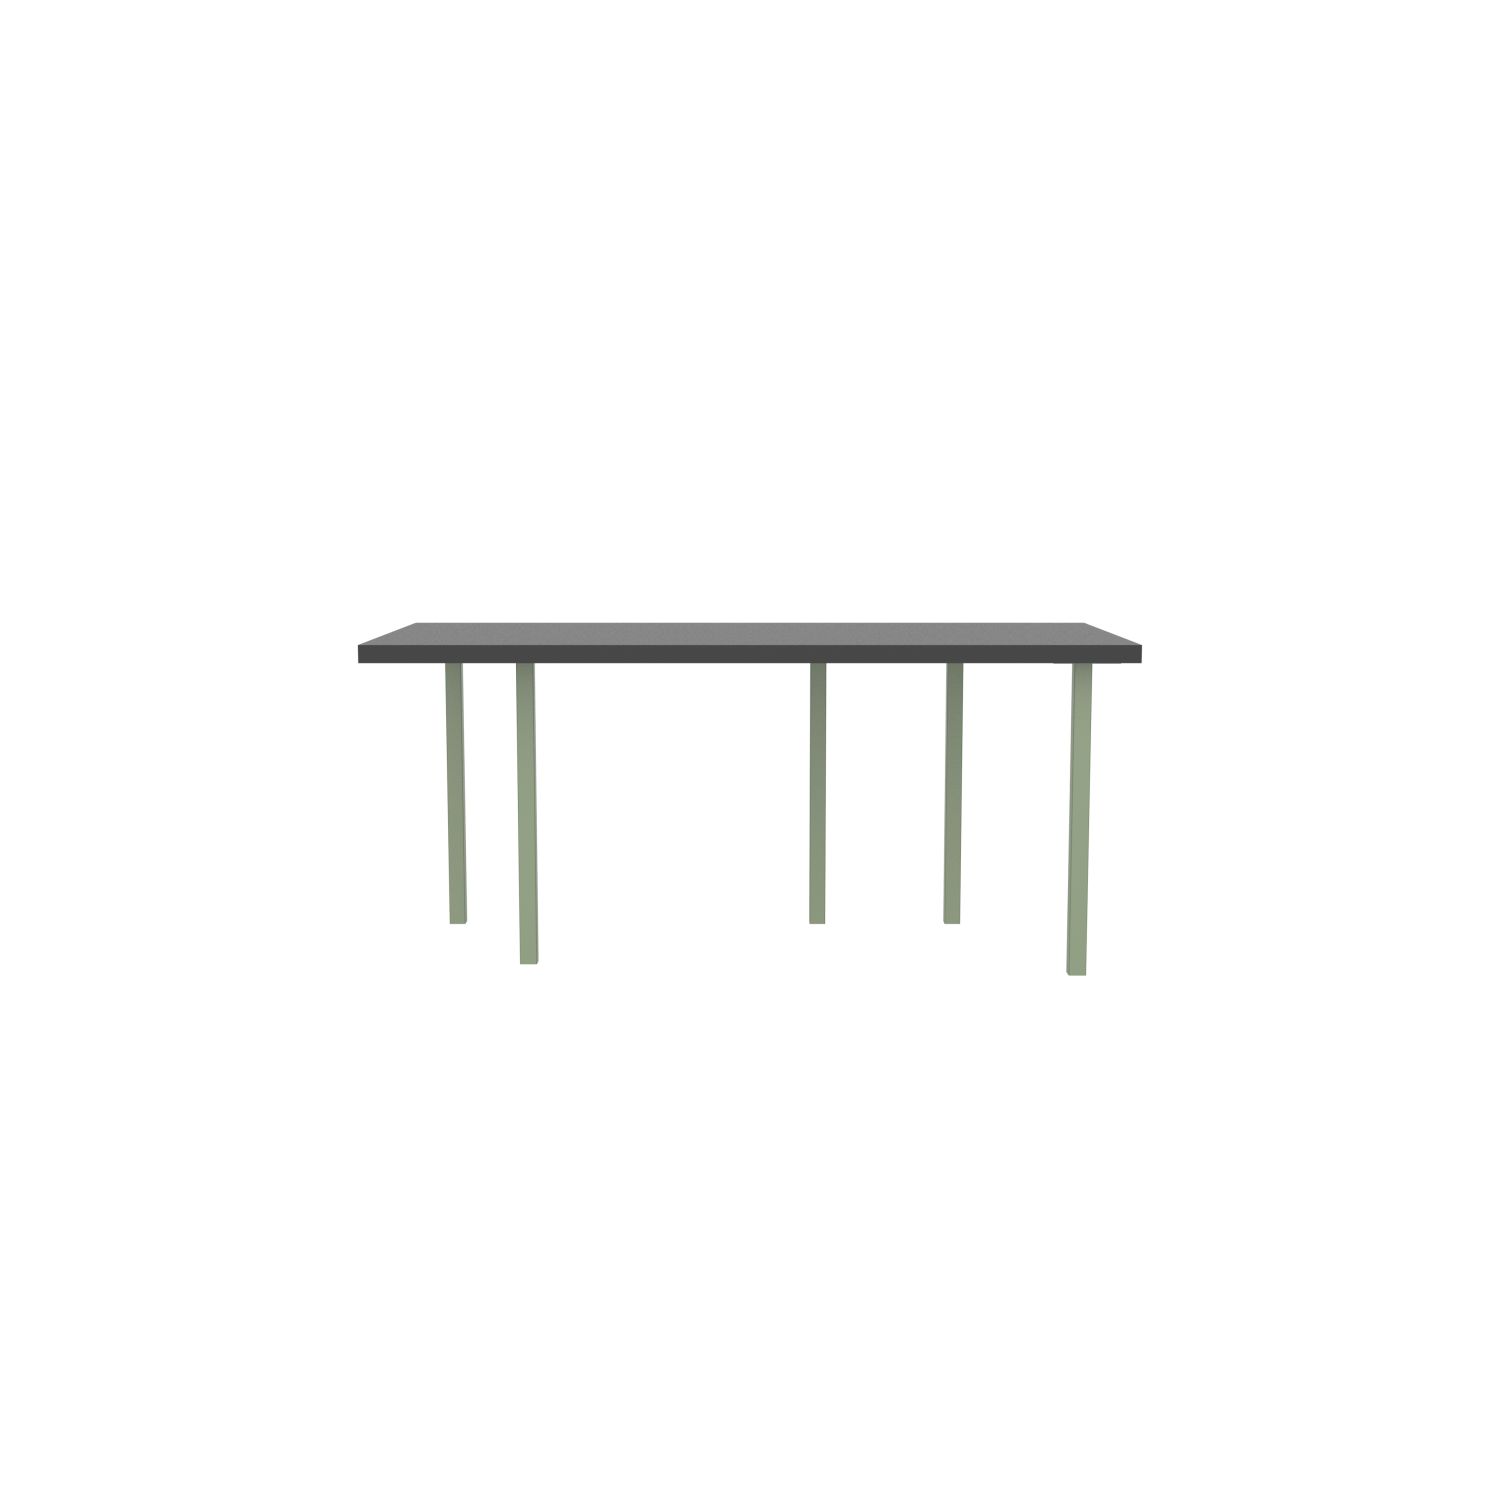 lensvelt bbrand table five fixed heigt 80x172 hpl black 50 mm price level 1 green ral6021